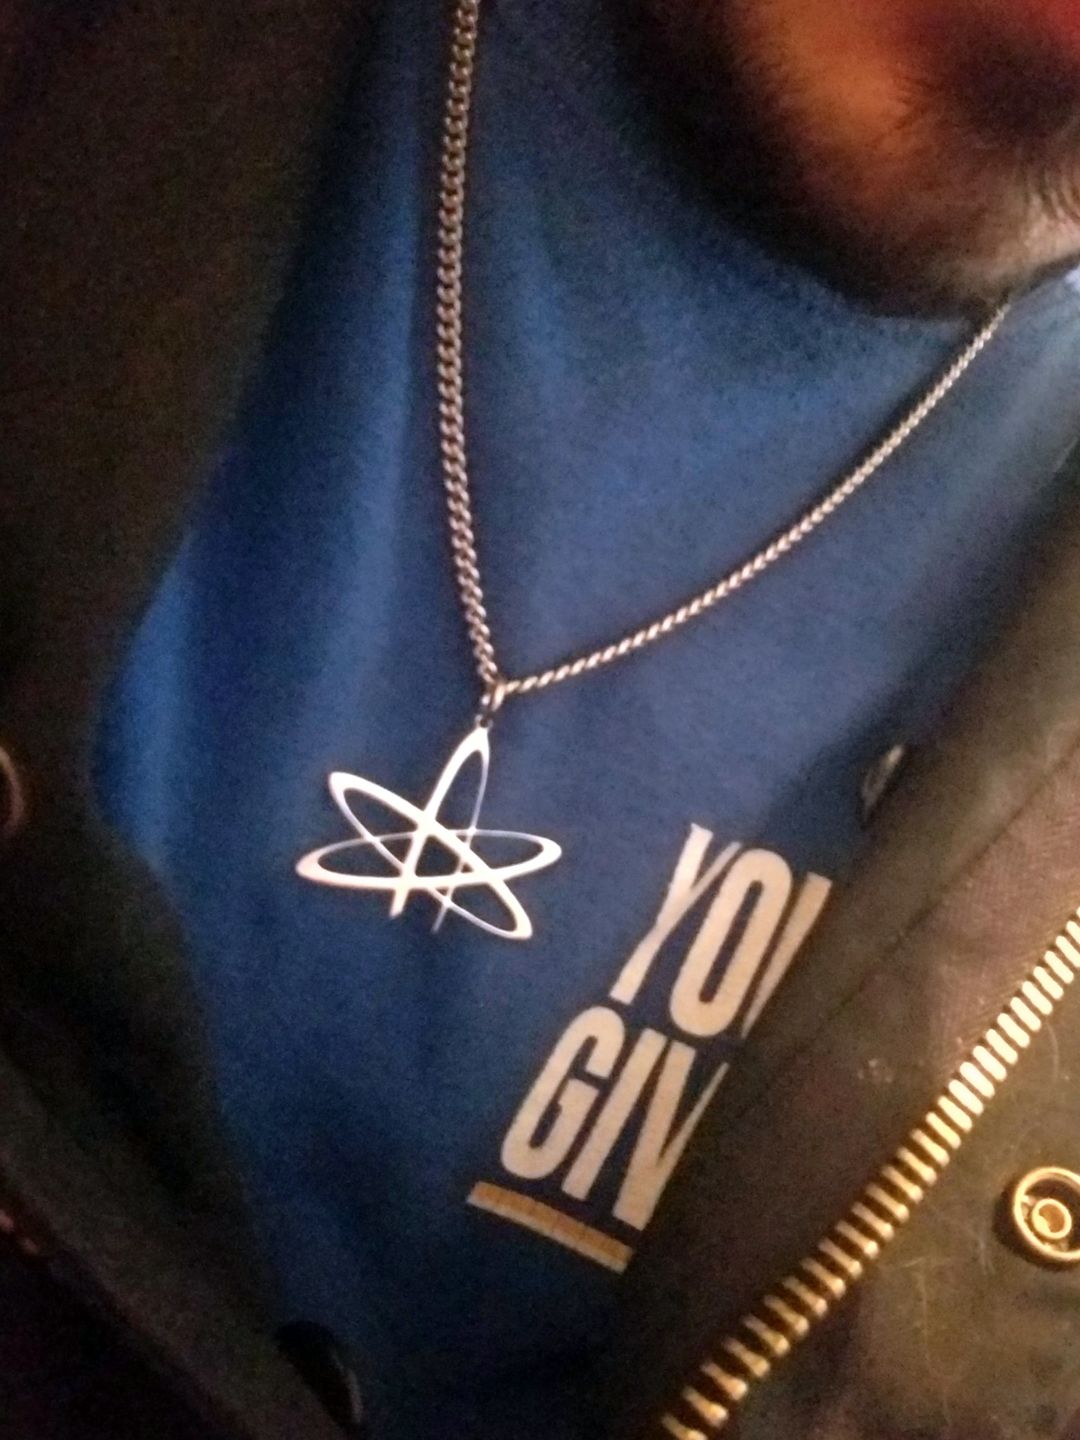 Zanthan L. review of Atheism Symbol Necklace
